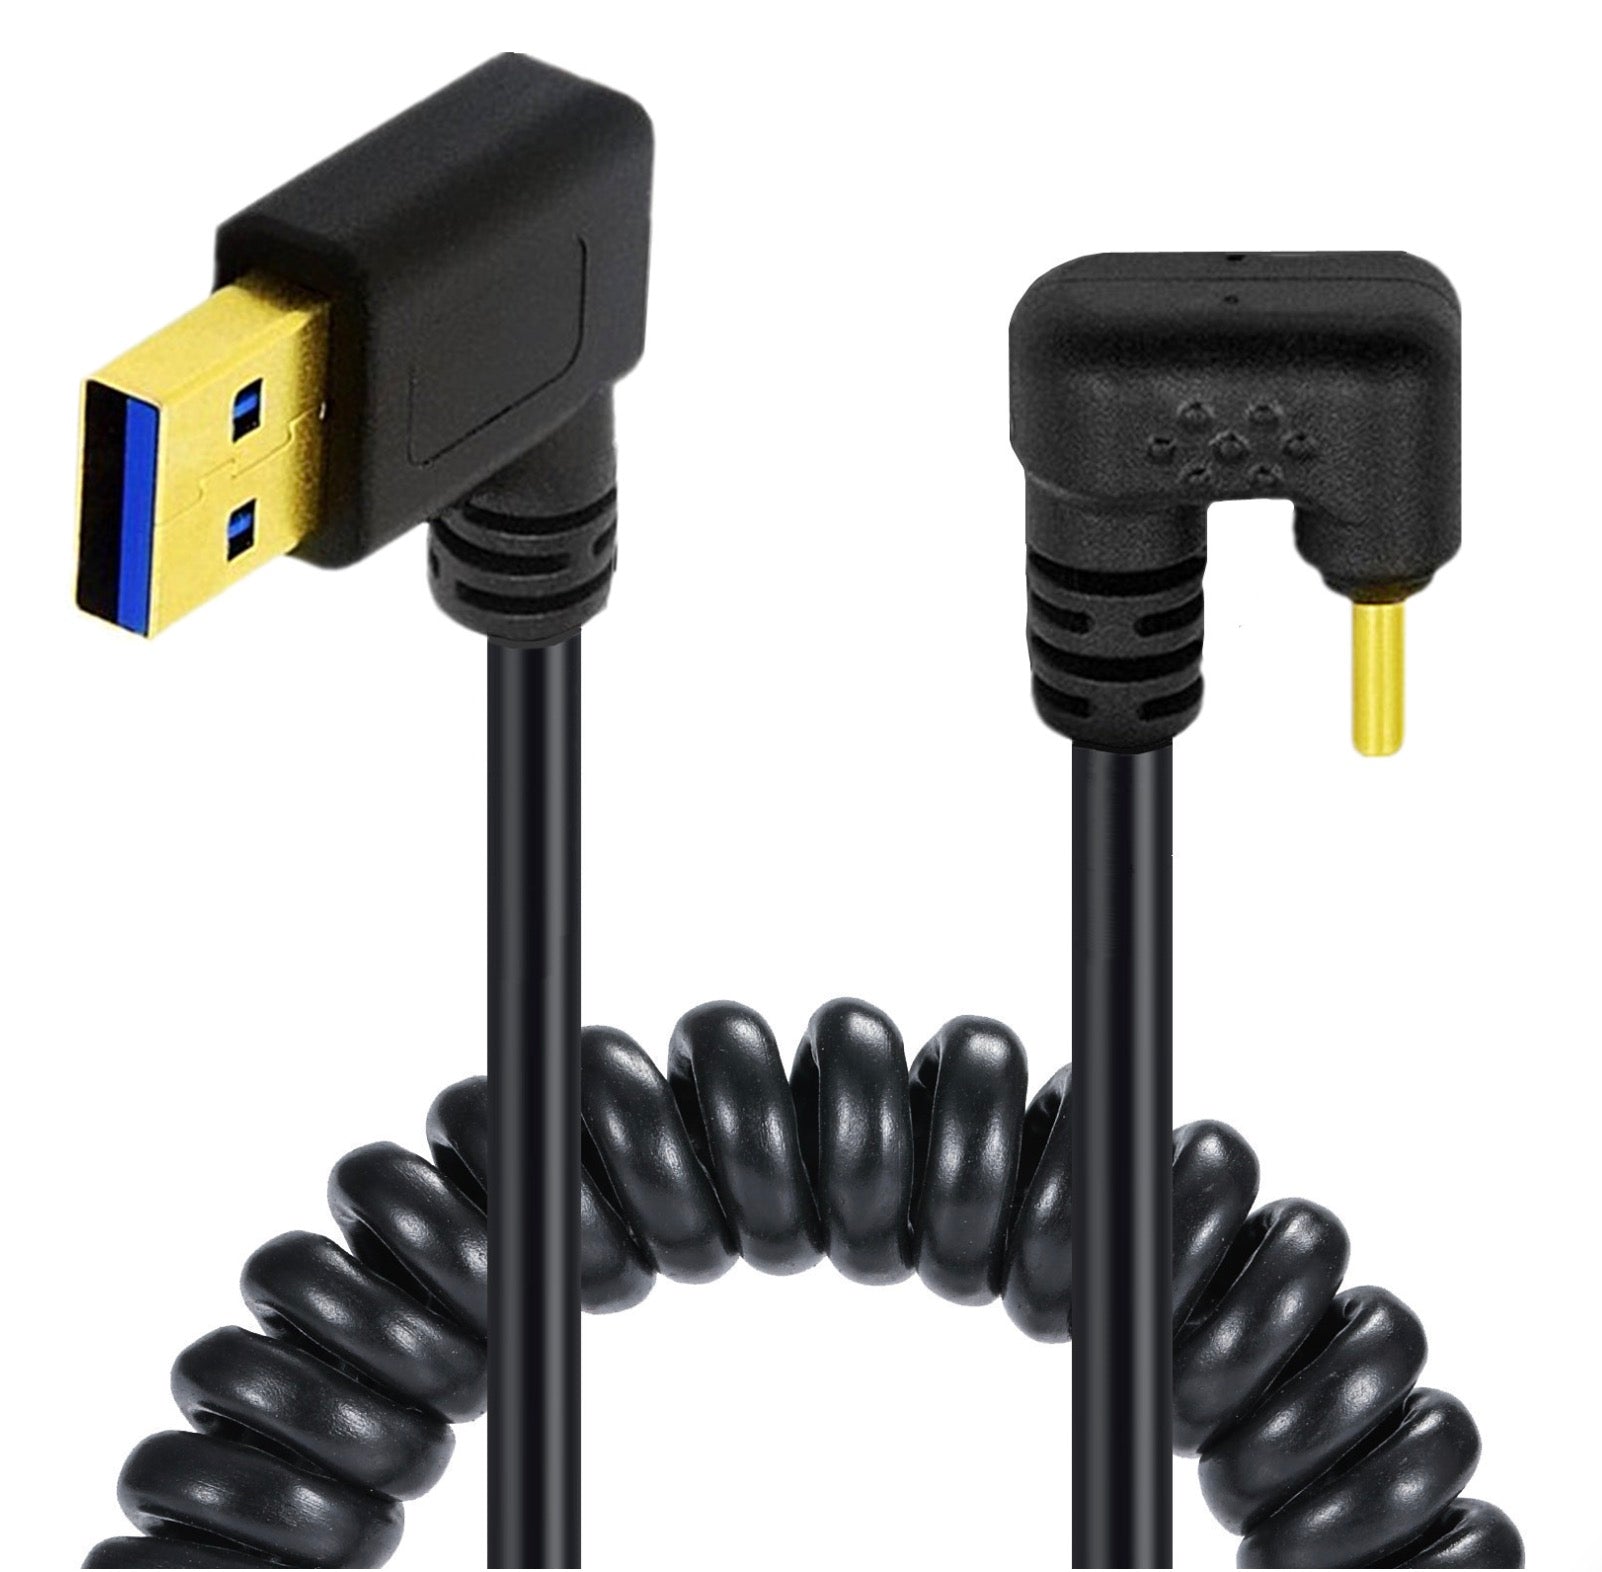 USB C Type-C Male U Shape to USB 3.0 A Male Coiled Cable- Right Angle